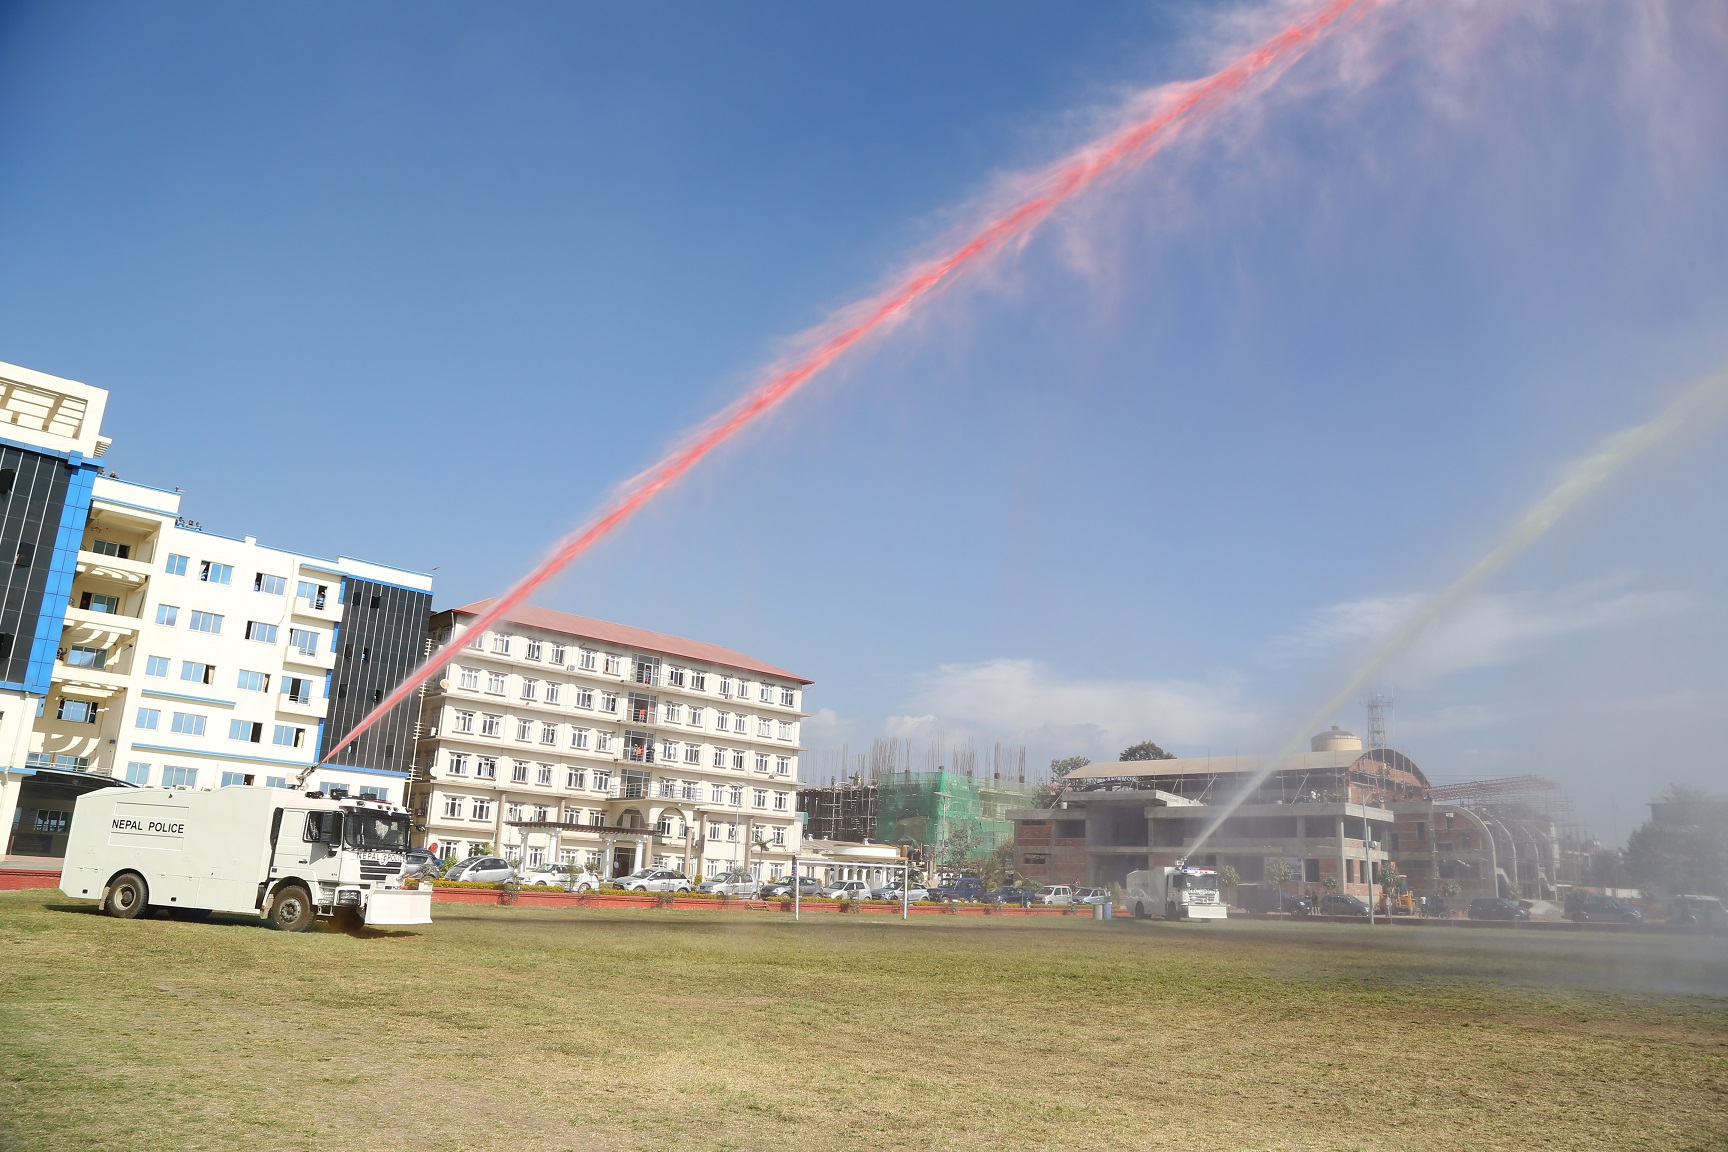 Nepal Police showcases new water cannons